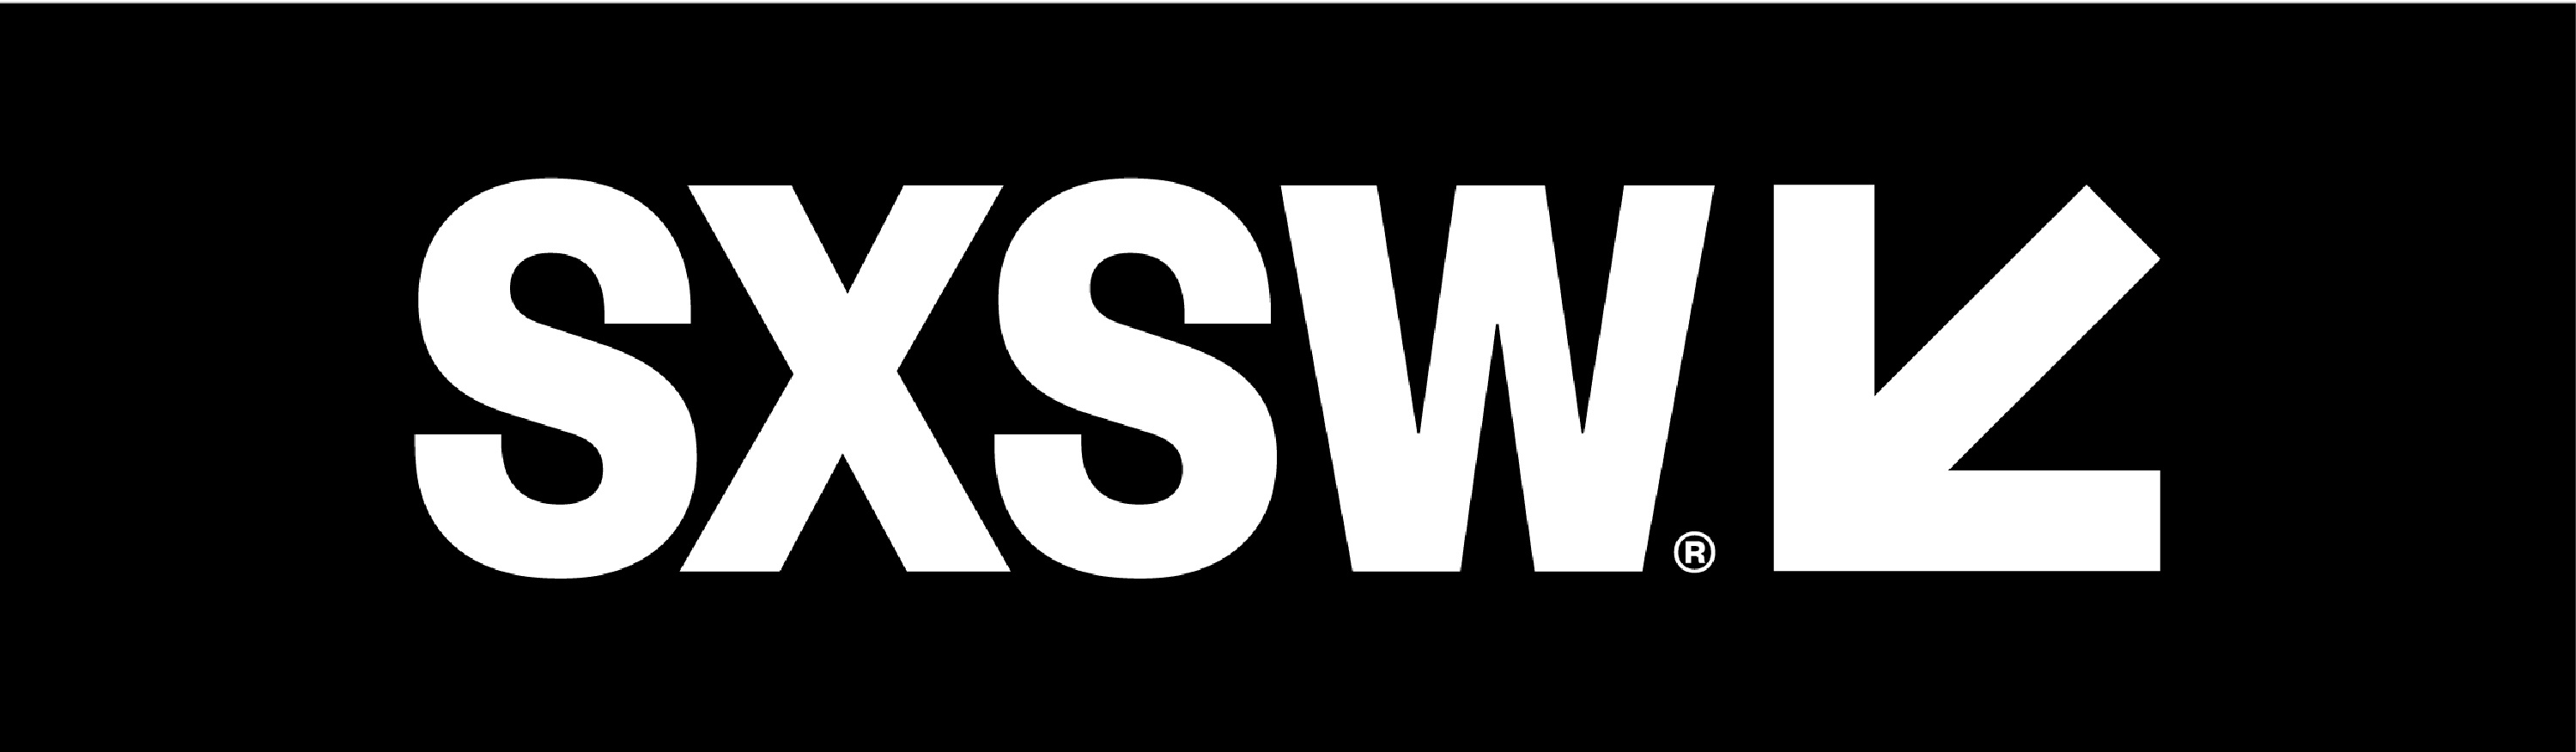 SXSW Announces New Featured Speakers For 2022 Event